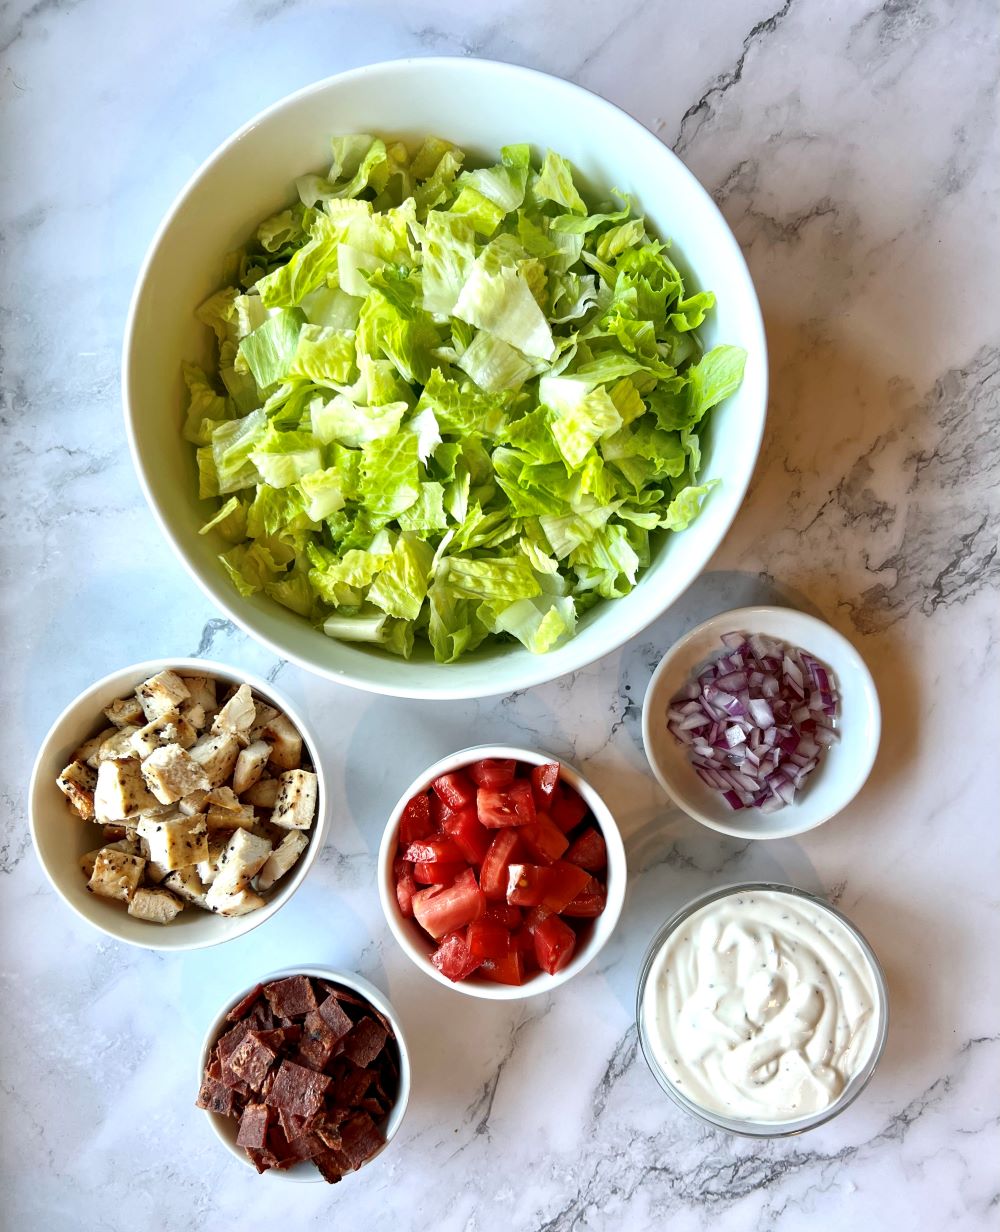 Ingredients list. Lettuce, cooked cubed chicken, cooked bacon, tomatoes, onion, and ranch dressing.